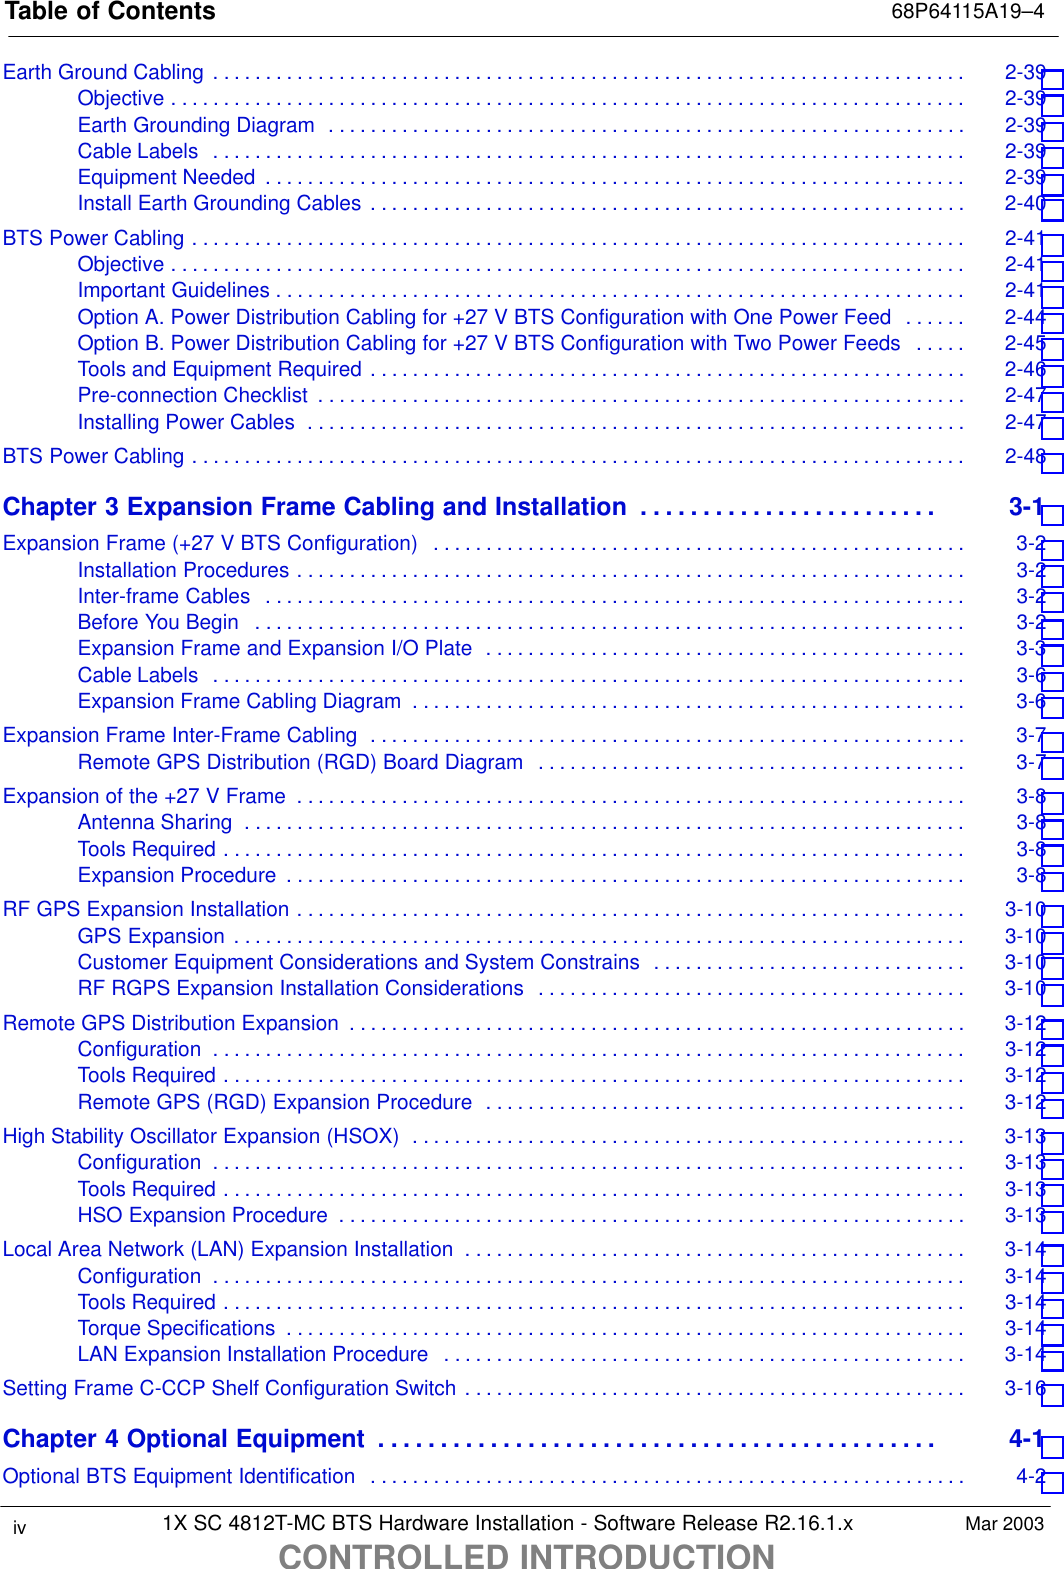 Table of Contents 68P64115A19–41X SC 4812T-MC BTS Hardware Installation - Software Release R2.16.1.xCONTROLLED INTRODUCTIONiv Mar 2003Earth Ground Cabling 2-39 . . . . . . . . . . . . . . . . . . . . . . . . . . . . . . . . . . . . . . . . . . . . . . . . . . . . . . . . . . . . . . . . . . . . . . . . Objective 2-39 . . . . . . . . . . . . . . . . . . . . . . . . . . . . . . . . . . . . . . . . . . . . . . . . . . . . . . . . . . . . . . . . . . . . . . . . . . . . Earth Grounding Diagram 2-39 . . . . . . . . . . . . . . . . . . . . . . . . . . . . . . . . . . . . . . . . . . . . . . . . . . . . . . . . . . . . . Cable Labels 2-39 . . . . . . . . . . . . . . . . . . . . . . . . . . . . . . . . . . . . . . . . . . . . . . . . . . . . . . . . . . . . . . . . . . . . . . . . Equipment Needed 2-39 . . . . . . . . . . . . . . . . . . . . . . . . . . . . . . . . . . . . . . . . . . . . . . . . . . . . . . . . . . . . . . . . . . . Install Earth Grounding Cables 2-40 . . . . . . . . . . . . . . . . . . . . . . . . . . . . . . . . . . . . . . . . . . . . . . . . . . . . . . . . . BTS Power Cabling 2-41 . . . . . . . . . . . . . . . . . . . . . . . . . . . . . . . . . . . . . . . . . . . . . . . . . . . . . . . . . . . . . . . . . . . . . . . . . . Objective 2-41 . . . . . . . . . . . . . . . . . . . . . . . . . . . . . . . . . . . . . . . . . . . . . . . . . . . . . . . . . . . . . . . . . . . . . . . . . . . . Important Guidelines 2-41 . . . . . . . . . . . . . . . . . . . . . . . . . . . . . . . . . . . . . . . . . . . . . . . . . . . . . . . . . . . . . . . . . . Option A. Power Distribution Cabling for +27 V BTS Configuration with One Power Feed 2-44 . . . . . . Option B. Power Distribution Cabling for +27 V BTS Configuration with Two Power Feeds 2-45 . . . . . Tools and Equipment Required 2-46 . . . . . . . . . . . . . . . . . . . . . . . . . . . . . . . . . . . . . . . . . . . . . . . . . . . . . . . . . Pre-connection Checklist 2-47 . . . . . . . . . . . . . . . . . . . . . . . . . . . . . . . . . . . . . . . . . . . . . . . . . . . . . . . . . . . . . . Installing Power Cables 2-47 . . . . . . . . . . . . . . . . . . . . . . . . . . . . . . . . . . . . . . . . . . . . . . . . . . . . . . . . . . . . . . . BTS Power Cabling 2-48 . . . . . . . . . . . . . . . . . . . . . . . . . . . . . . . . . . . . . . . . . . . . . . . . . . . . . . . . . . . . . . . . . . . . . . . . . . Chapter 3 Expansion Frame Cabling and Installation 3-1 . . . . . . . . . . . . . . . . . . . . . . . . Expansion Frame (+27 V BTS Configuration) 3-2 . . . . . . . . . . . . . . . . . . . . . . . . . . . . . . . . . . . . . . . . . . . . . . . . . . . Installation Procedures 3-2 . . . . . . . . . . . . . . . . . . . . . . . . . . . . . . . . . . . . . . . . . . . . . . . . . . . . . . . . . . . . . . . . Inter-frame Cables 3-2 . . . . . . . . . . . . . . . . . . . . . . . . . . . . . . . . . . . . . . . . . . . . . . . . . . . . . . . . . . . . . . . . . . . Before You Begin 3-2 . . . . . . . . . . . . . . . . . . . . . . . . . . . . . . . . . . . . . . . . . . . . . . . . . . . . . . . . . . . . . . . . . . . . Expansion Frame and Expansion I/O Plate 3-3 . . . . . . . . . . . . . . . . . . . . . . . . . . . . . . . . . . . . . . . . . . . . . . Cable Labels 3-6 . . . . . . . . . . . . . . . . . . . . . . . . . . . . . . . . . . . . . . . . . . . . . . . . . . . . . . . . . . . . . . . . . . . . . . . . Expansion Frame Cabling Diagram 3-6 . . . . . . . . . . . . . . . . . . . . . . . . . . . . . . . . . . . . . . . . . . . . . . . . . . . . . Expansion Frame Inter-Frame Cabling 3-7 . . . . . . . . . . . . . . . . . . . . . . . . . . . . . . . . . . . . . . . . . . . . . . . . . . . . . . . . . Remote GPS Distribution (RGD) Board Diagram 3-7 . . . . . . . . . . . . . . . . . . . . . . . . . . . . . . . . . . . . . . . . . Expansion of the +27 V Frame 3-8 . . . . . . . . . . . . . . . . . . . . . . . . . . . . . . . . . . . . . . . . . . . . . . . . . . . . . . . . . . . . . . . . Antenna Sharing 3-8 . . . . . . . . . . . . . . . . . . . . . . . . . . . . . . . . . . . . . . . . . . . . . . . . . . . . . . . . . . . . . . . . . . . . . Tools Required 3-8 . . . . . . . . . . . . . . . . . . . . . . . . . . . . . . . . . . . . . . . . . . . . . . . . . . . . . . . . . . . . . . . . . . . . . . . Expansion Procedure 3-8 . . . . . . . . . . . . . . . . . . . . . . . . . . . . . . . . . . . . . . . . . . . . . . . . . . . . . . . . . . . . . . . . . RF GPS Expansion Installation 3-10 . . . . . . . . . . . . . . . . . . . . . . . . . . . . . . . . . . . . . . . . . . . . . . . . . . . . . . . . . . . . . . . . GPS Expansion 3-10 . . . . . . . . . . . . . . . . . . . . . . . . . . . . . . . . . . . . . . . . . . . . . . . . . . . . . . . . . . . . . . . . . . . . . . Customer Equipment Considerations and System Constrains 3-10 . . . . . . . . . . . . . . . . . . . . . . . . . . . . . . RF RGPS Expansion Installation Considerations 3-10 . . . . . . . . . . . . . . . . . . . . . . . . . . . . . . . . . . . . . . . . . Remote GPS Distribution Expansion 3-12 . . . . . . . . . . . . . . . . . . . . . . . . . . . . . . . . . . . . . . . . . . . . . . . . . . . . . . . . . . . Configuration 3-12 . . . . . . . . . . . . . . . . . . . . . . . . . . . . . . . . . . . . . . . . . . . . . . . . . . . . . . . . . . . . . . . . . . . . . . . . Tools Required 3-12 . . . . . . . . . . . . . . . . . . . . . . . . . . . . . . . . . . . . . . . . . . . . . . . . . . . . . . . . . . . . . . . . . . . . . . . Remote GPS (RGD) Expansion Procedure 3-12 . . . . . . . . . . . . . . . . . . . . . . . . . . . . . . . . . . . . . . . . . . . . . . High Stability Oscillator Expansion (HSOX) 3-13 . . . . . . . . . . . . . . . . . . . . . . . . . . . . . . . . . . . . . . . . . . . . . . . . . . . . . Configuration 3-13 . . . . . . . . . . . . . . . . . . . . . . . . . . . . . . . . . . . . . . . . . . . . . . . . . . . . . . . . . . . . . . . . . . . . . . . . Tools Required 3-13 . . . . . . . . . . . . . . . . . . . . . . . . . . . . . . . . . . . . . . . . . . . . . . . . . . . . . . . . . . . . . . . . . . . . . . . HSO Expansion Procedure 3-13 . . . . . . . . . . . . . . . . . . . . . . . . . . . . . . . . . . . . . . . . . . . . . . . . . . . . . . . . . . . . Local Area Network (LAN) Expansion Installation 3-14 . . . . . . . . . . . . . . . . . . . . . . . . . . . . . . . . . . . . . . . . . . . . . . . . Configuration 3-14 . . . . . . . . . . . . . . . . . . . . . . . . . . . . . . . . . . . . . . . . . . . . . . . . . . . . . . . . . . . . . . . . . . . . . . . . Tools Required 3-14 . . . . . . . . . . . . . . . . . . . . . . . . . . . . . . . . . . . . . . . . . . . . . . . . . . . . . . . . . . . . . . . . . . . . . . . Torque Specifications 3-14 . . . . . . . . . . . . . . . . . . . . . . . . . . . . . . . . . . . . . . . . . . . . . . . . . . . . . . . . . . . . . . . . . LAN Expansion Installation Procedure 3-14 . . . . . . . . . . . . . . . . . . . . . . . . . . . . . . . . . . . . . . . . . . . . . . . . . . Setting Frame C-CCP Shelf Configuration Switch 3-16 . . . . . . . . . . . . . . . . . . . . . . . . . . . . . . . . . . . . . . . . . . . . . . . . Chapter 4 Optional Equipment 4-1 . . . . . . . . . . . . . . . . . . . . . . . . . . . . . . . . . . . . . . . . . . . . . Optional BTS Equipment Identification 4-2 . . . . . . . . . . . . . . . . . . . . . . . . . . . . . . . . . . . . . . . . . . . . . . . . . . . . . . . . . 